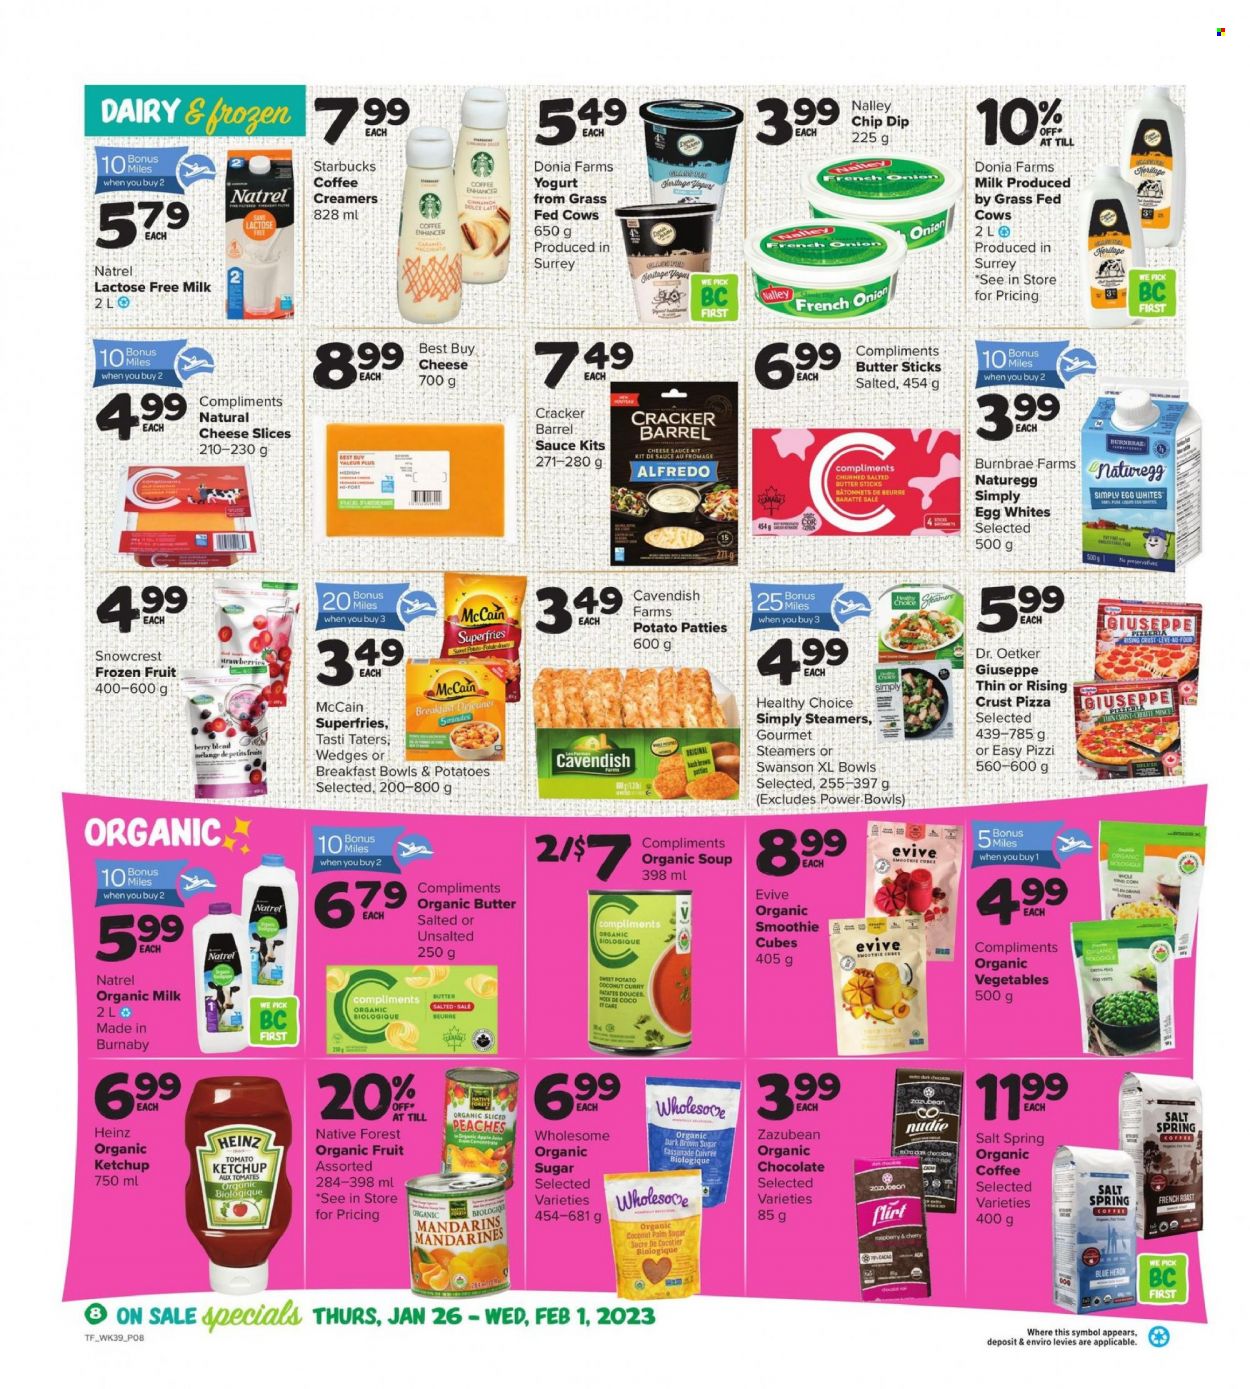 thumbnail - Thrifty Foods Flyer - January 26, 2023 - February 01, 2023 - Sales products - sweet potato, potatoes, peas, mandarines, peaches, pizza, soup, sauce, breakfast bowl, Healthy Choice, sliced cheese, Dr. Oetker, yoghurt, organic milk, lactose free milk, eggs, butter, salted butter, dip, McCain, potato fries, chocolate, crackers, dark chocolate, cane sugar, cinnamon, caramel, apple juice, juice, smoothie, organic coffee, Starbucks, Heinz, ketchup. Page 8.